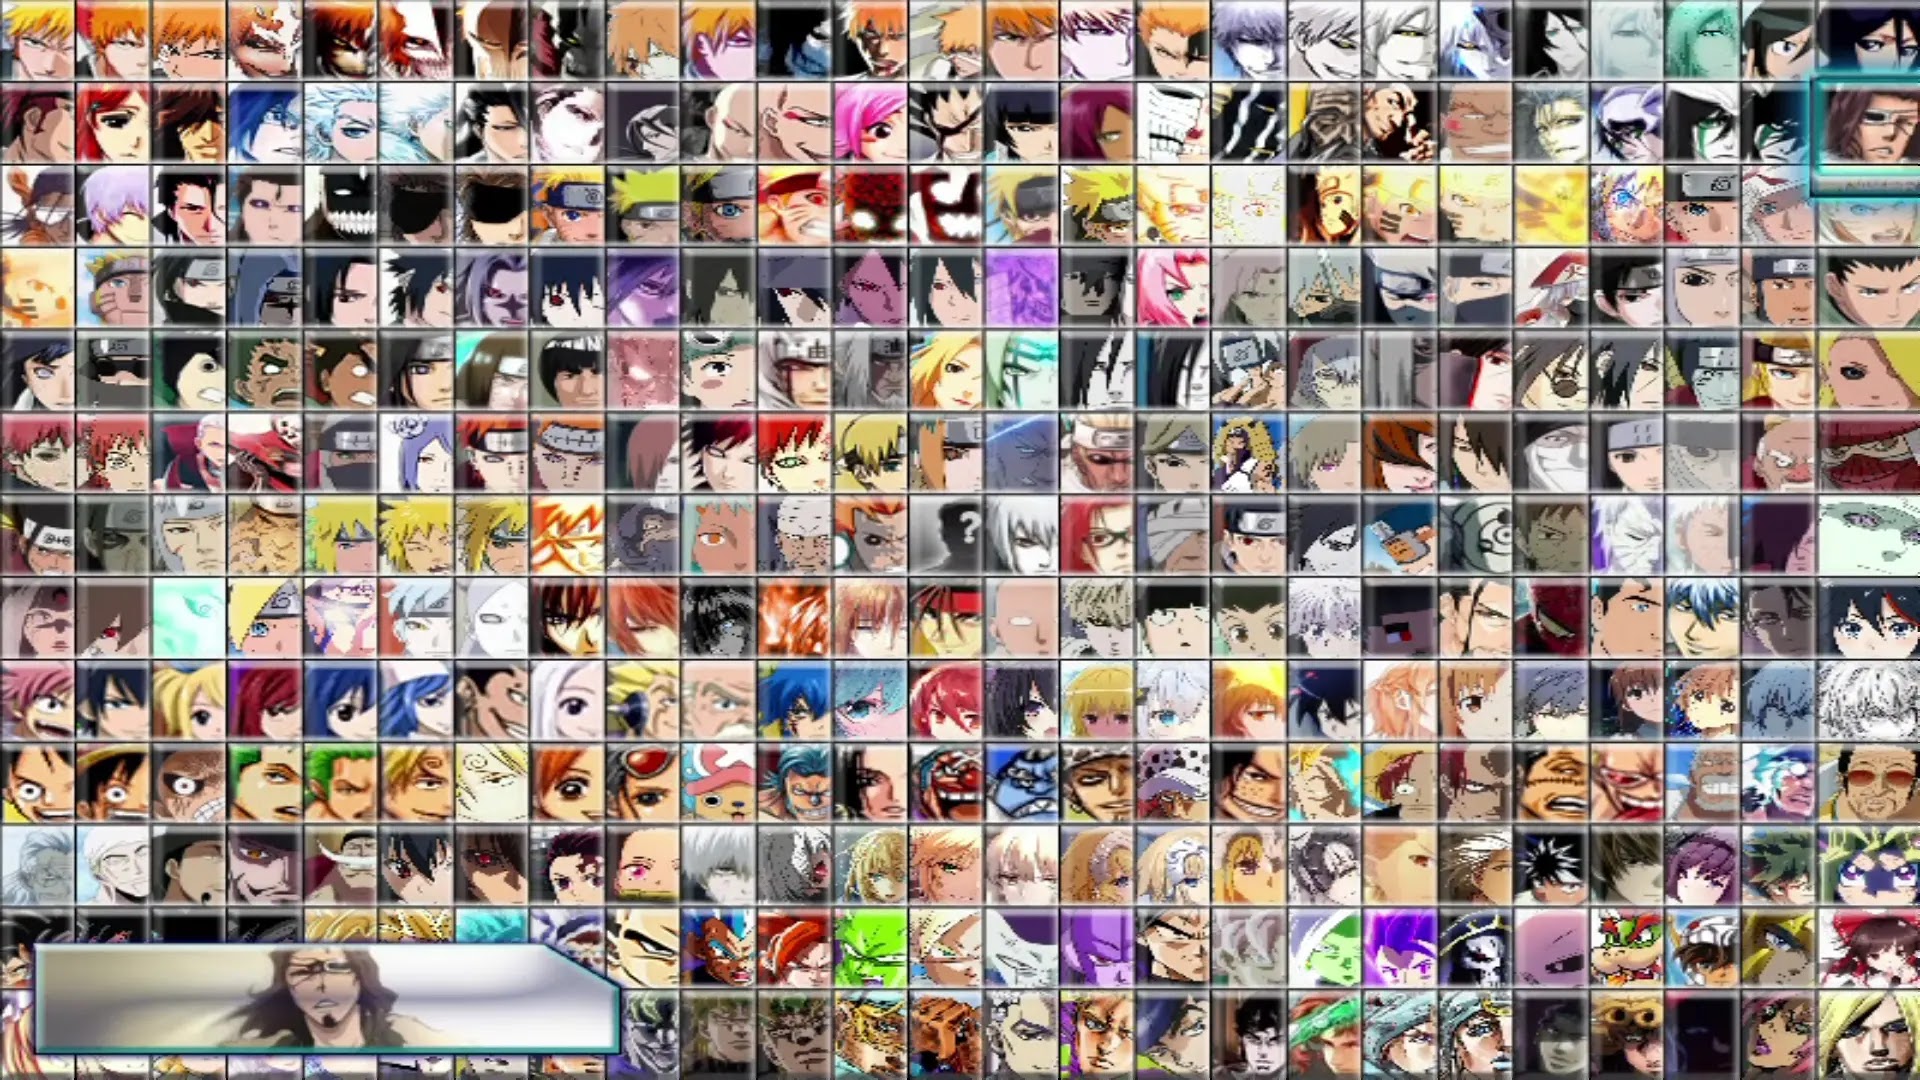 Anime Vs Mugen Apk For Android With 540 And 325 Characters